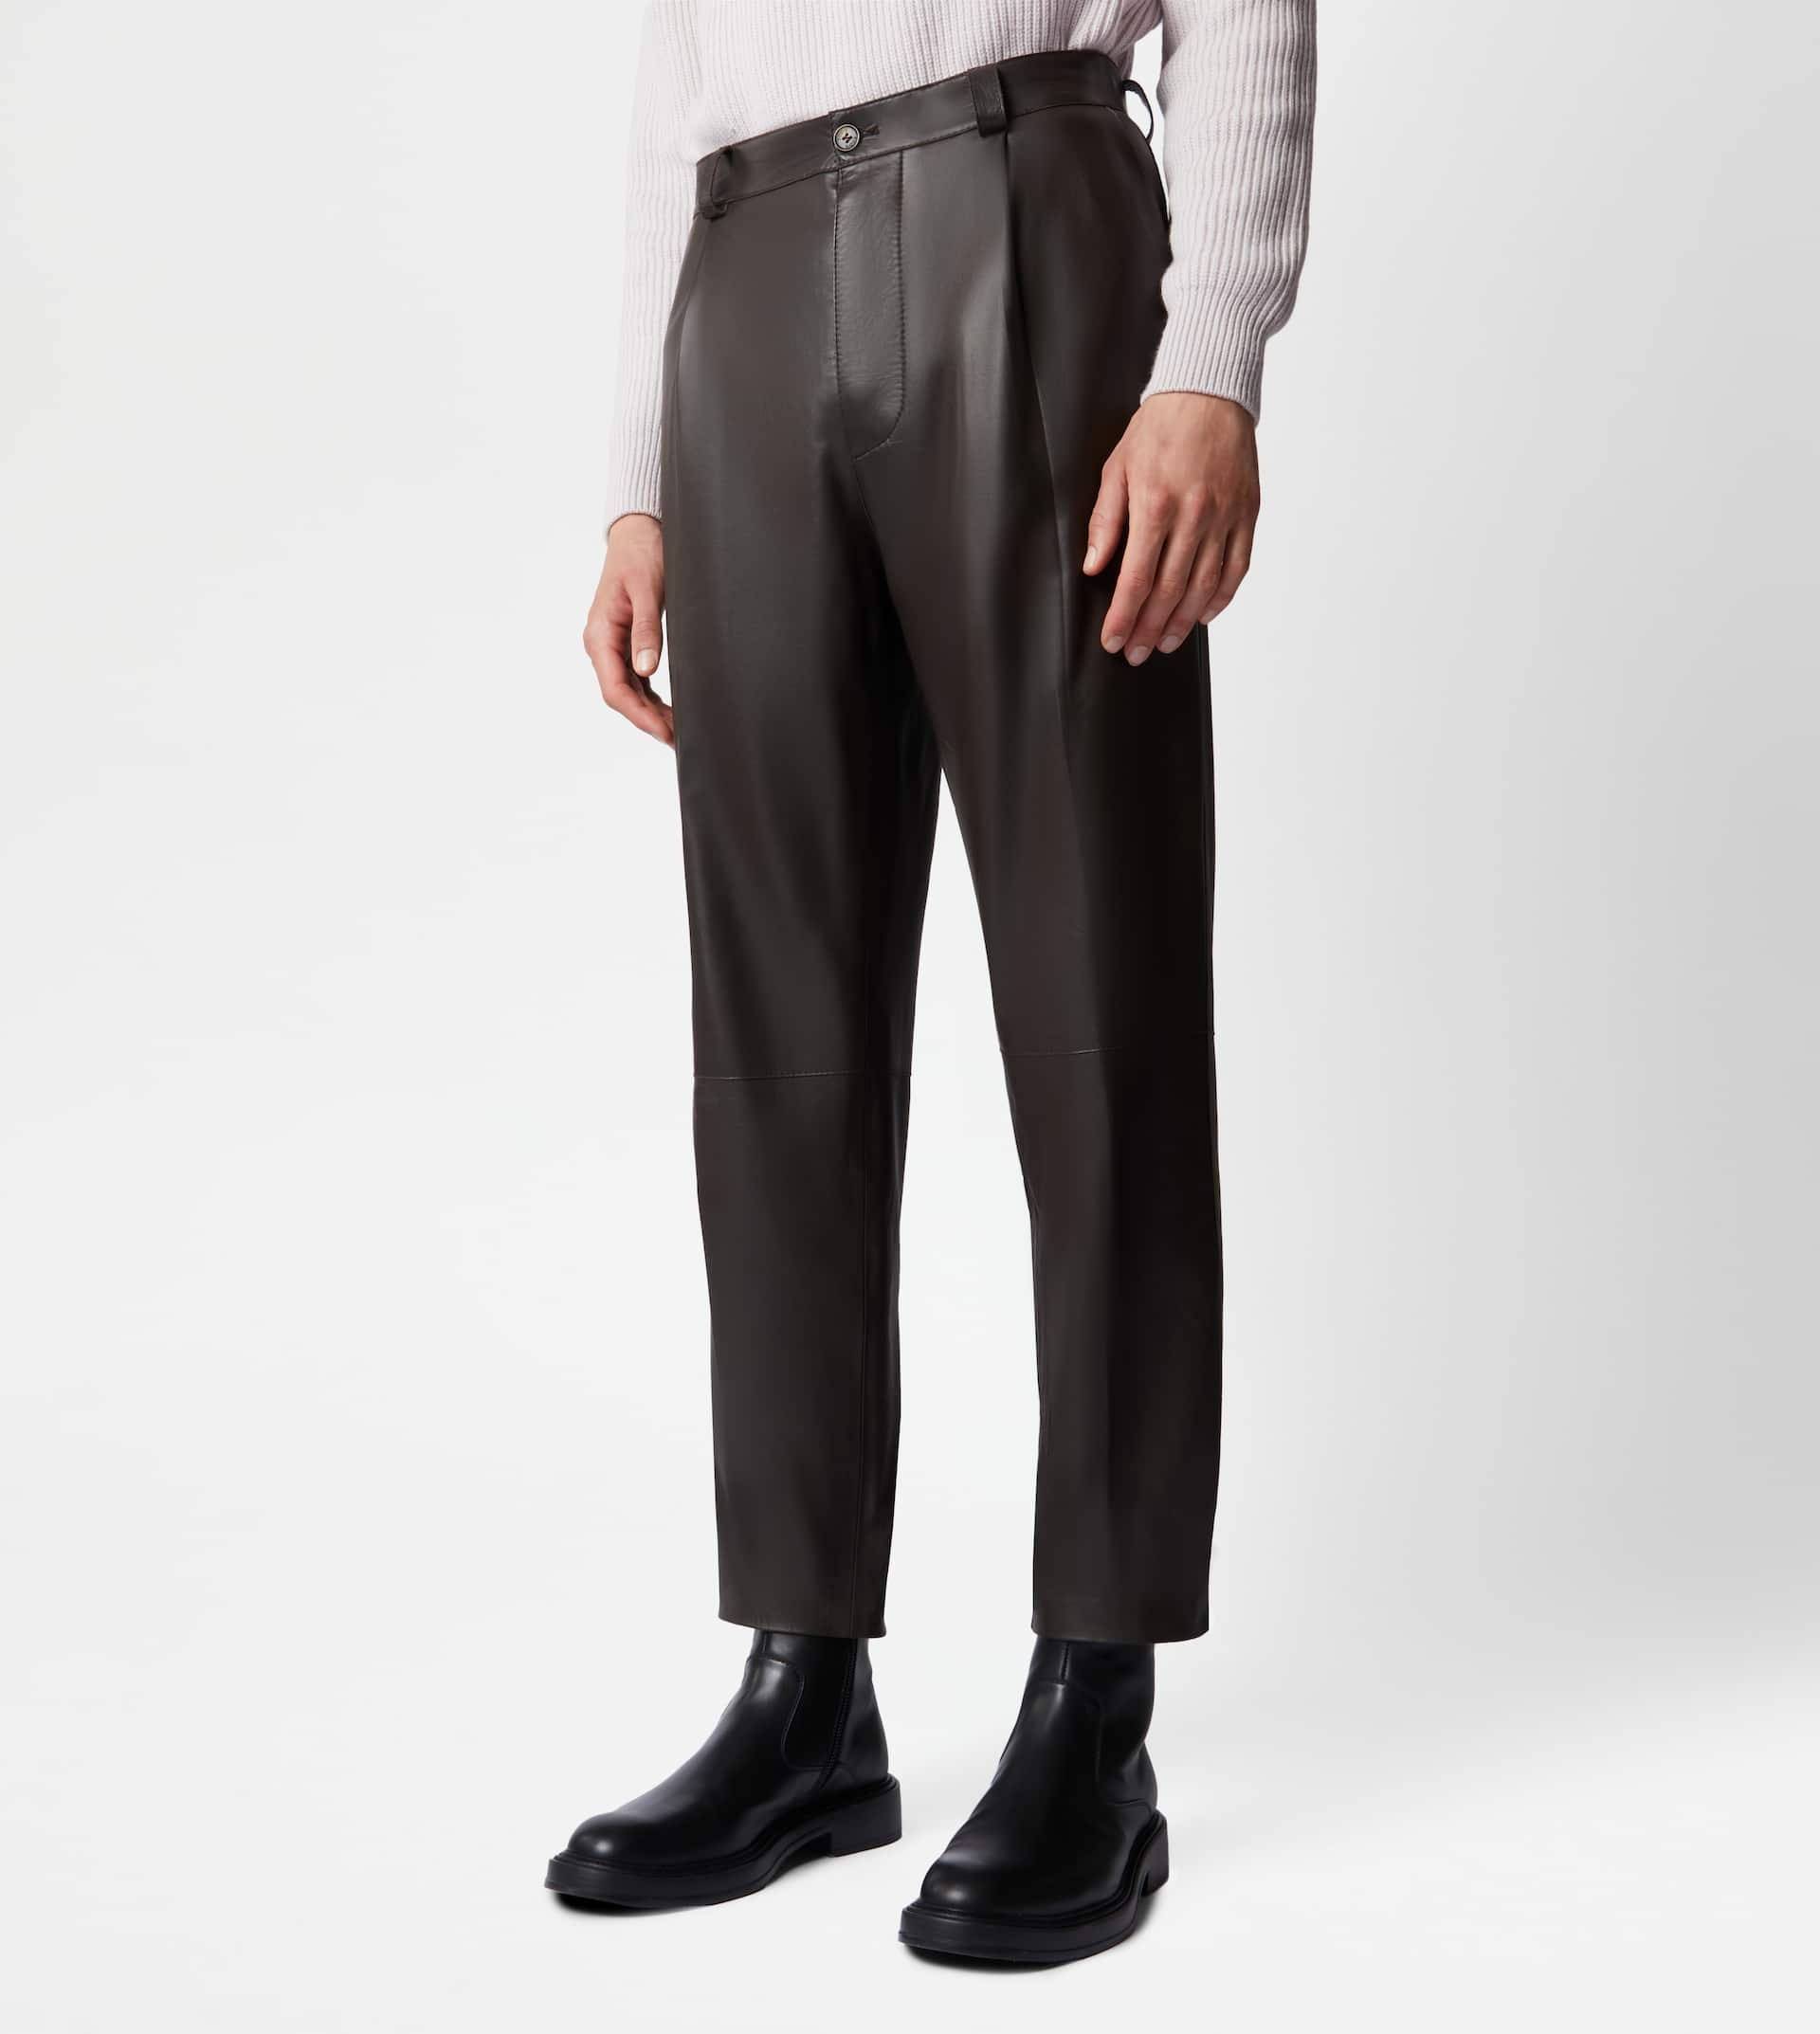 PANTS IN NAPPA LEATHER - BROWN - 5